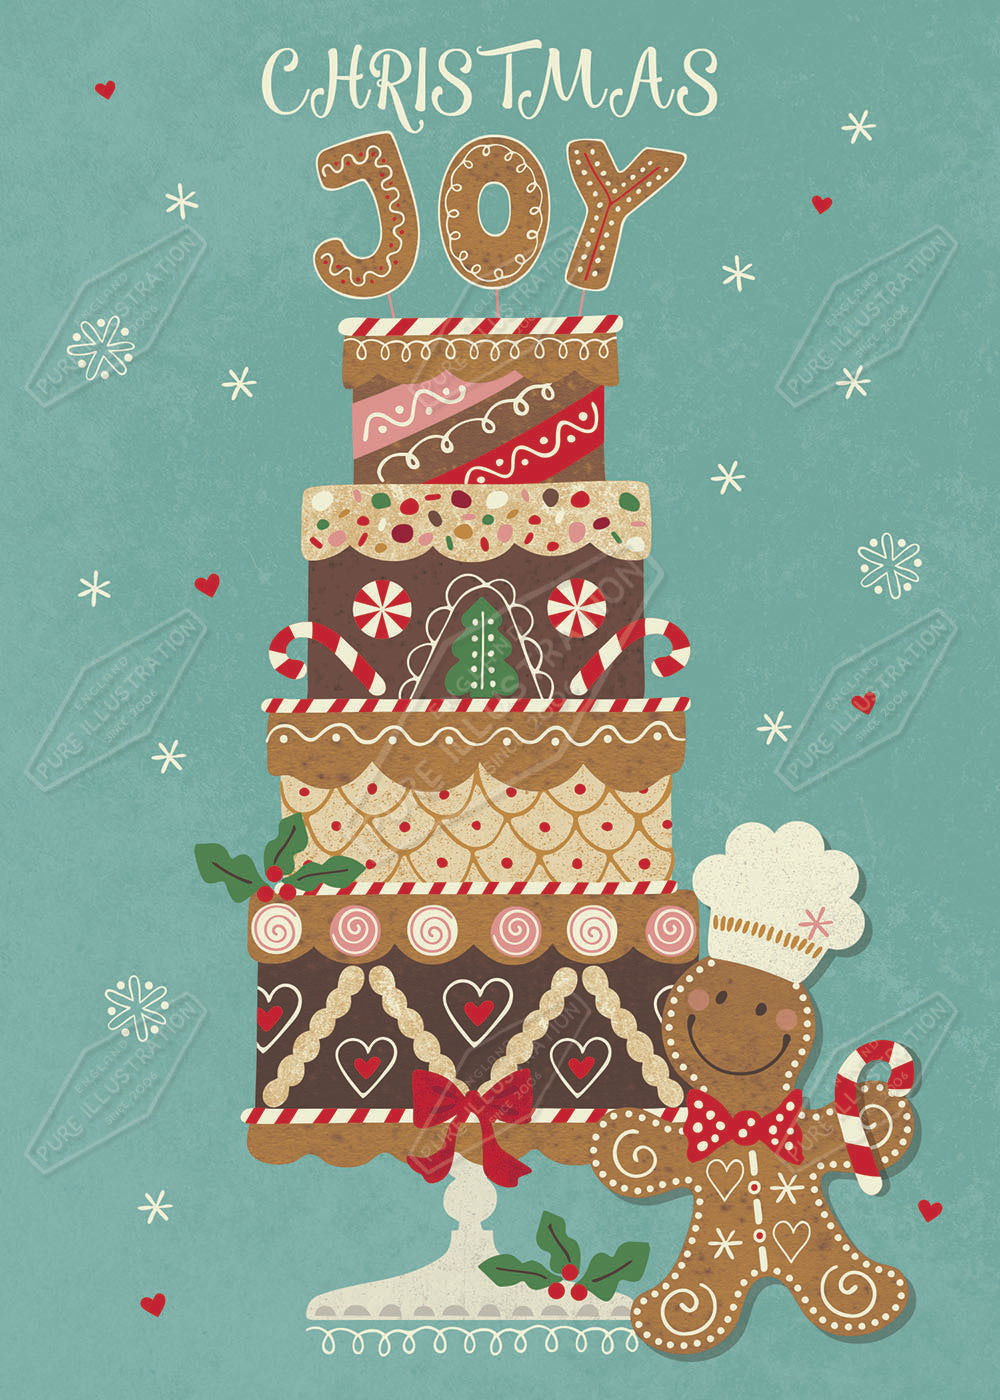 Gingerbread Cake Christmas Design by Gill Eggleston for Pure Art Licensing Agency & Surface Design Studio